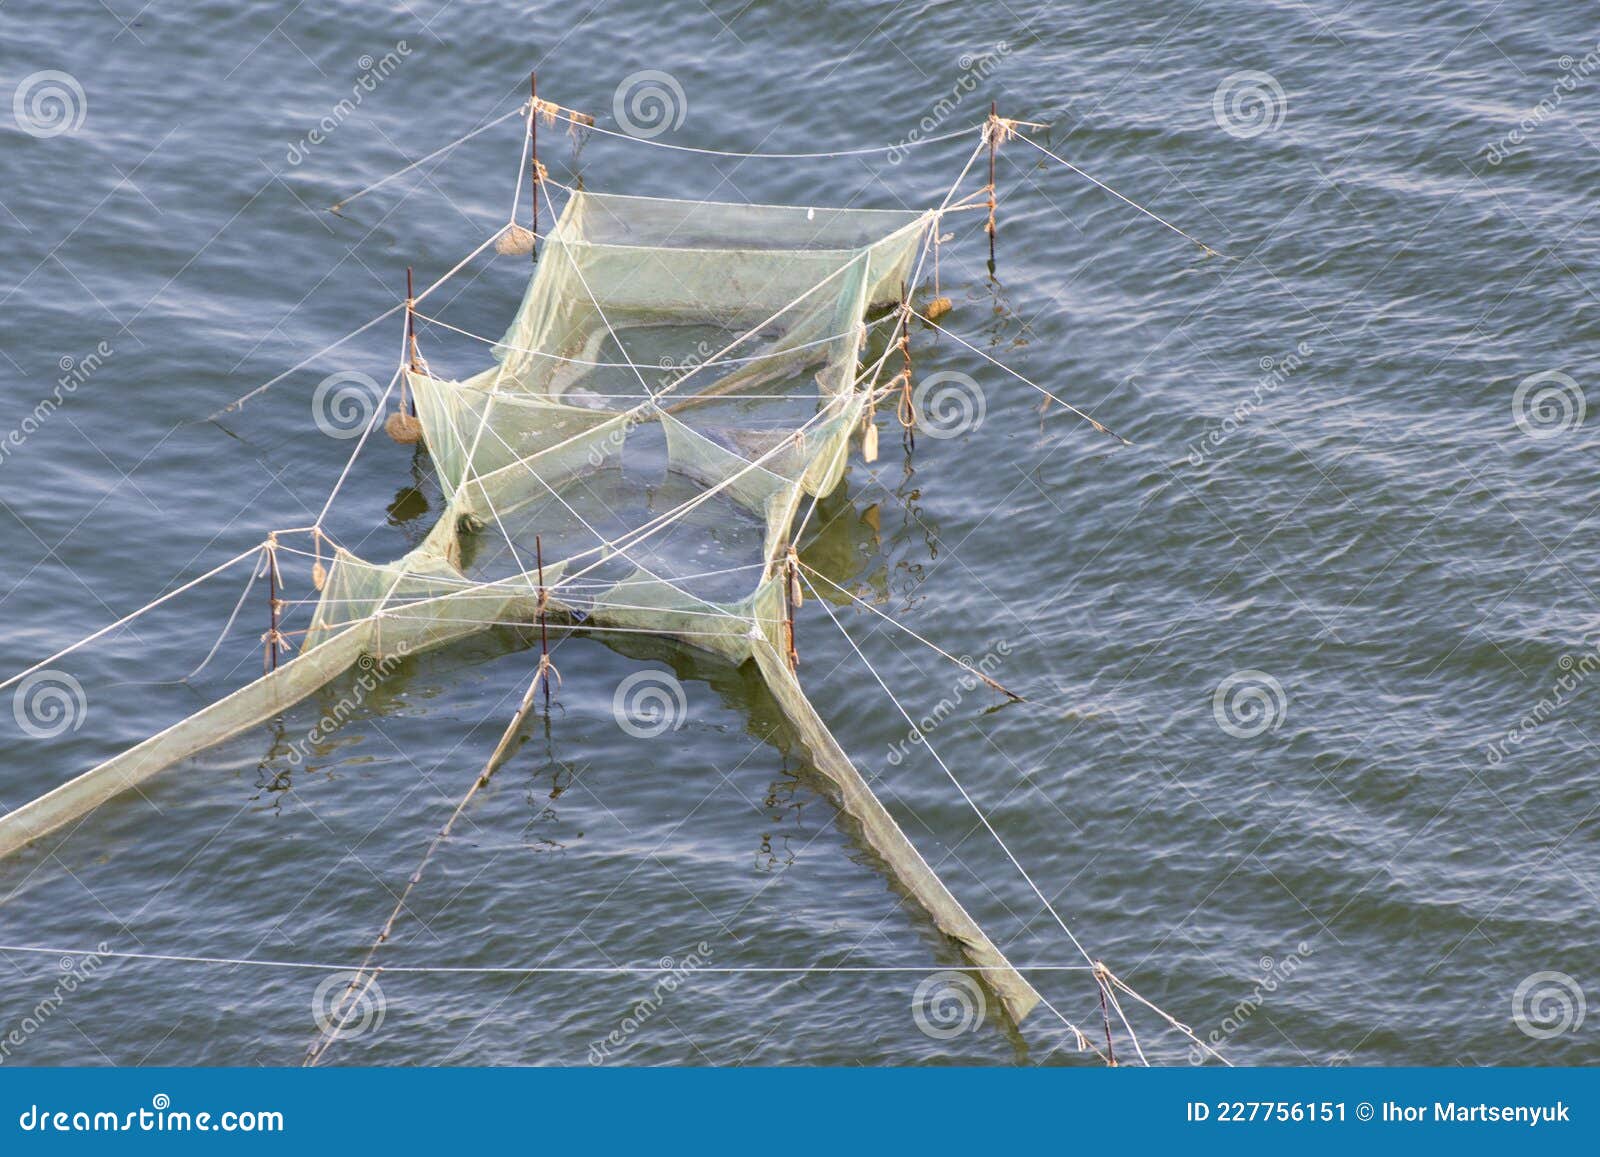 Tackle, a Net for Catching Sea Shrimp is Installed in the Sea Stock Image -  Image of nautical, care: 227756151